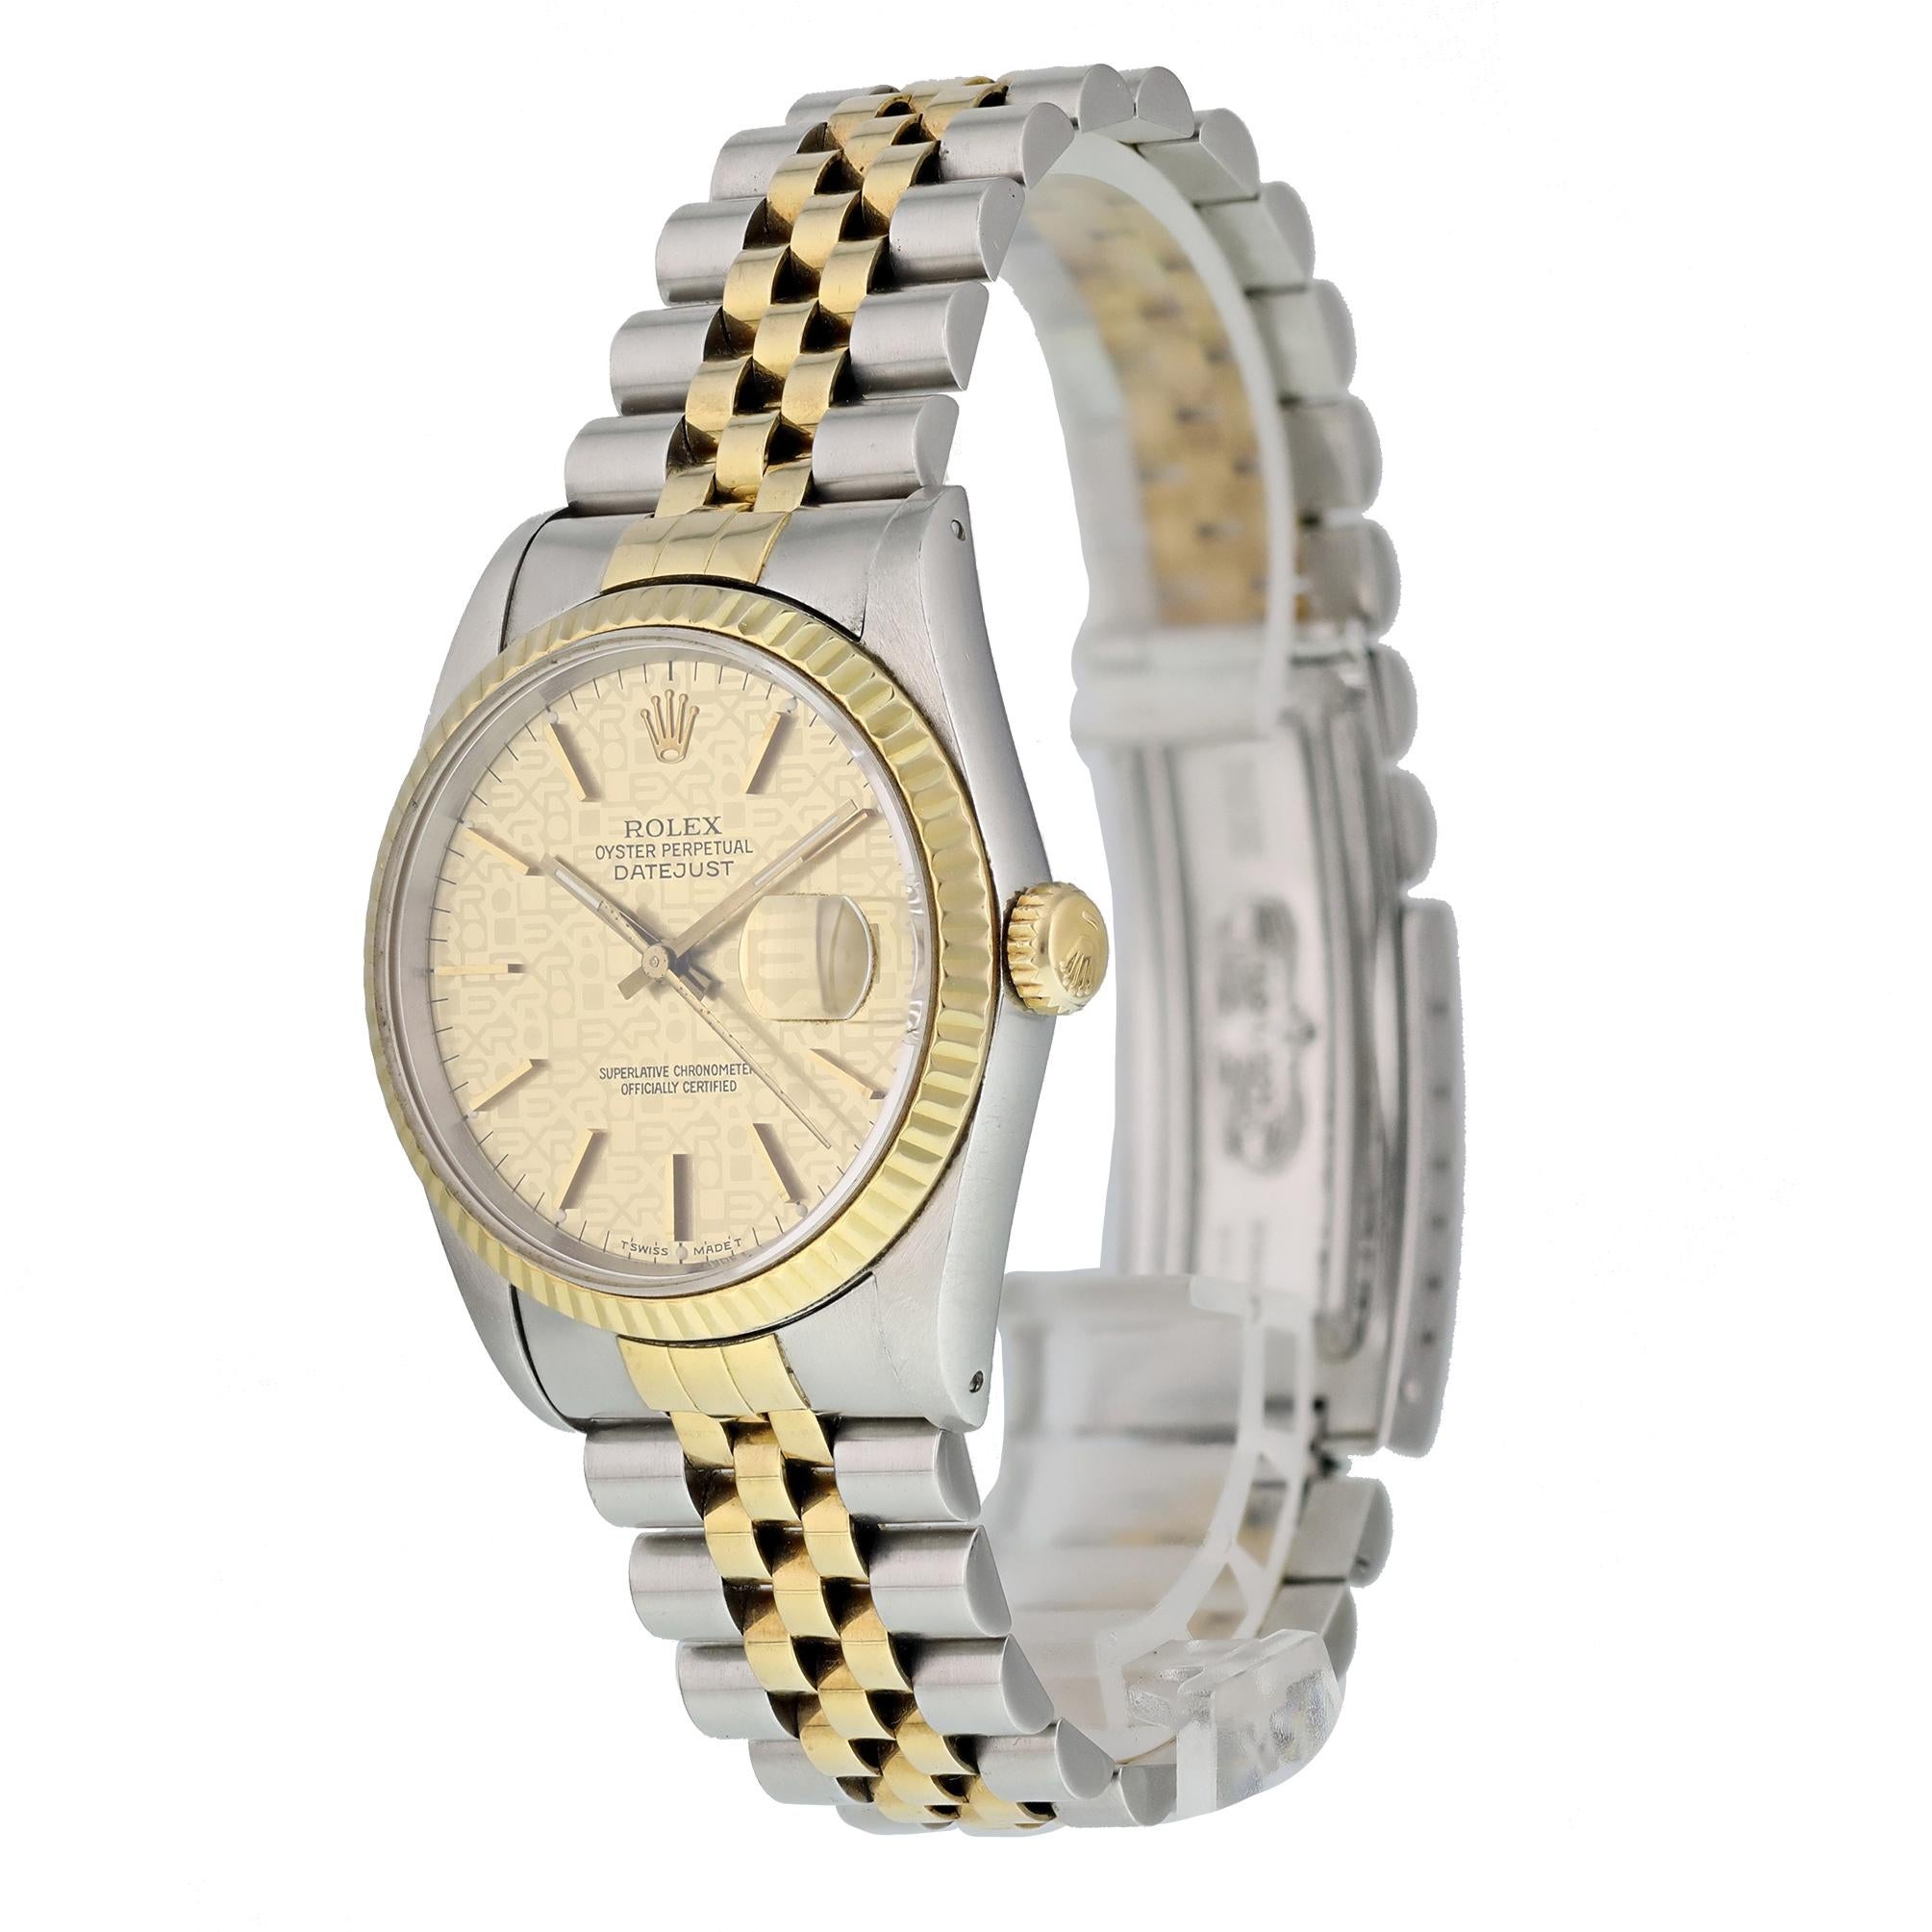 Rolex Datejust 16233 Mens Watch. 
36mm Stainless Steel case. 
Yellow Gold fluted bezel. 
Champagne jubilee dial with Luminous gold hands and index hour markers. 
Minute markers on the outer dial. 
Date display at the 3 o'clock position. 
Two Tone